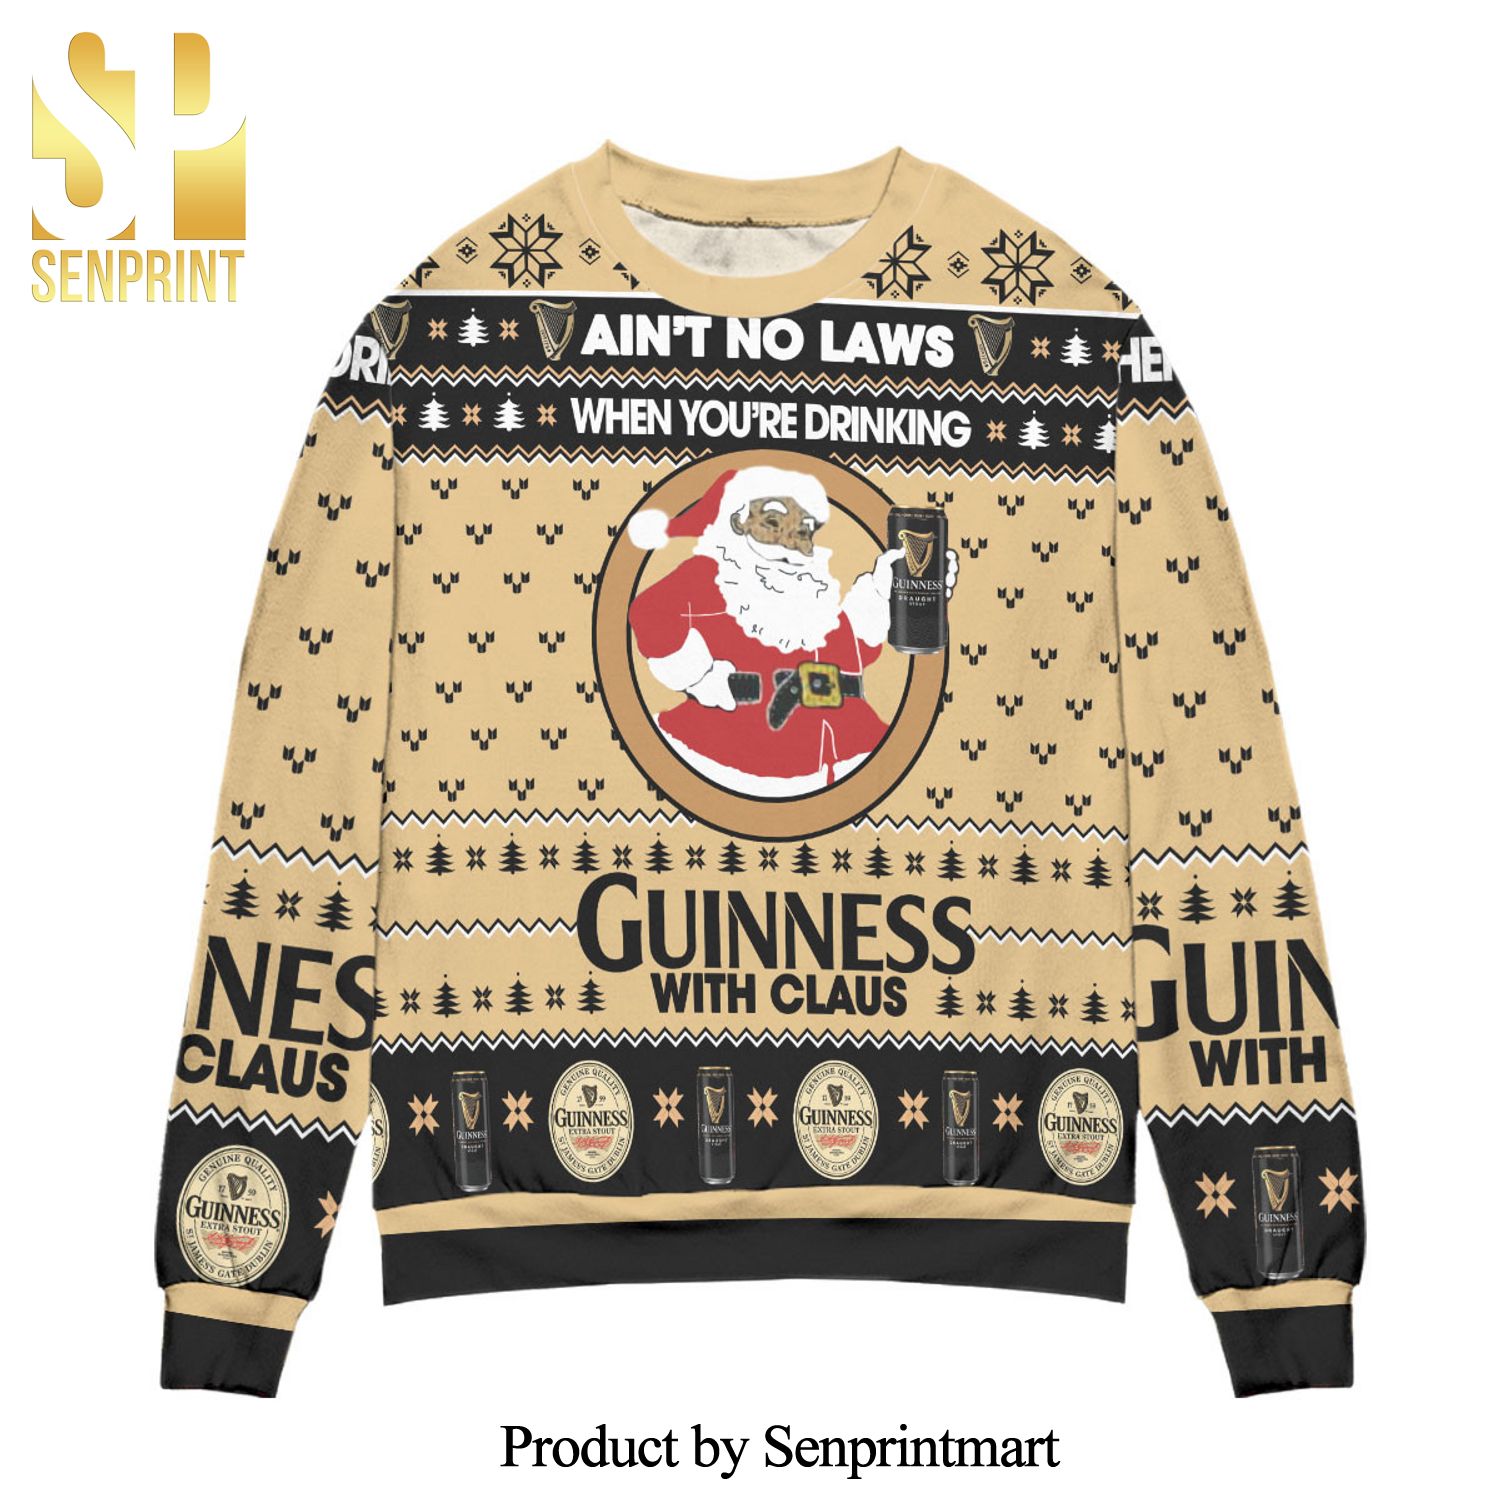 Ain’t No Laws When You’re Drinking Guinness With Claus Knitted Ugly Christmas Sweater